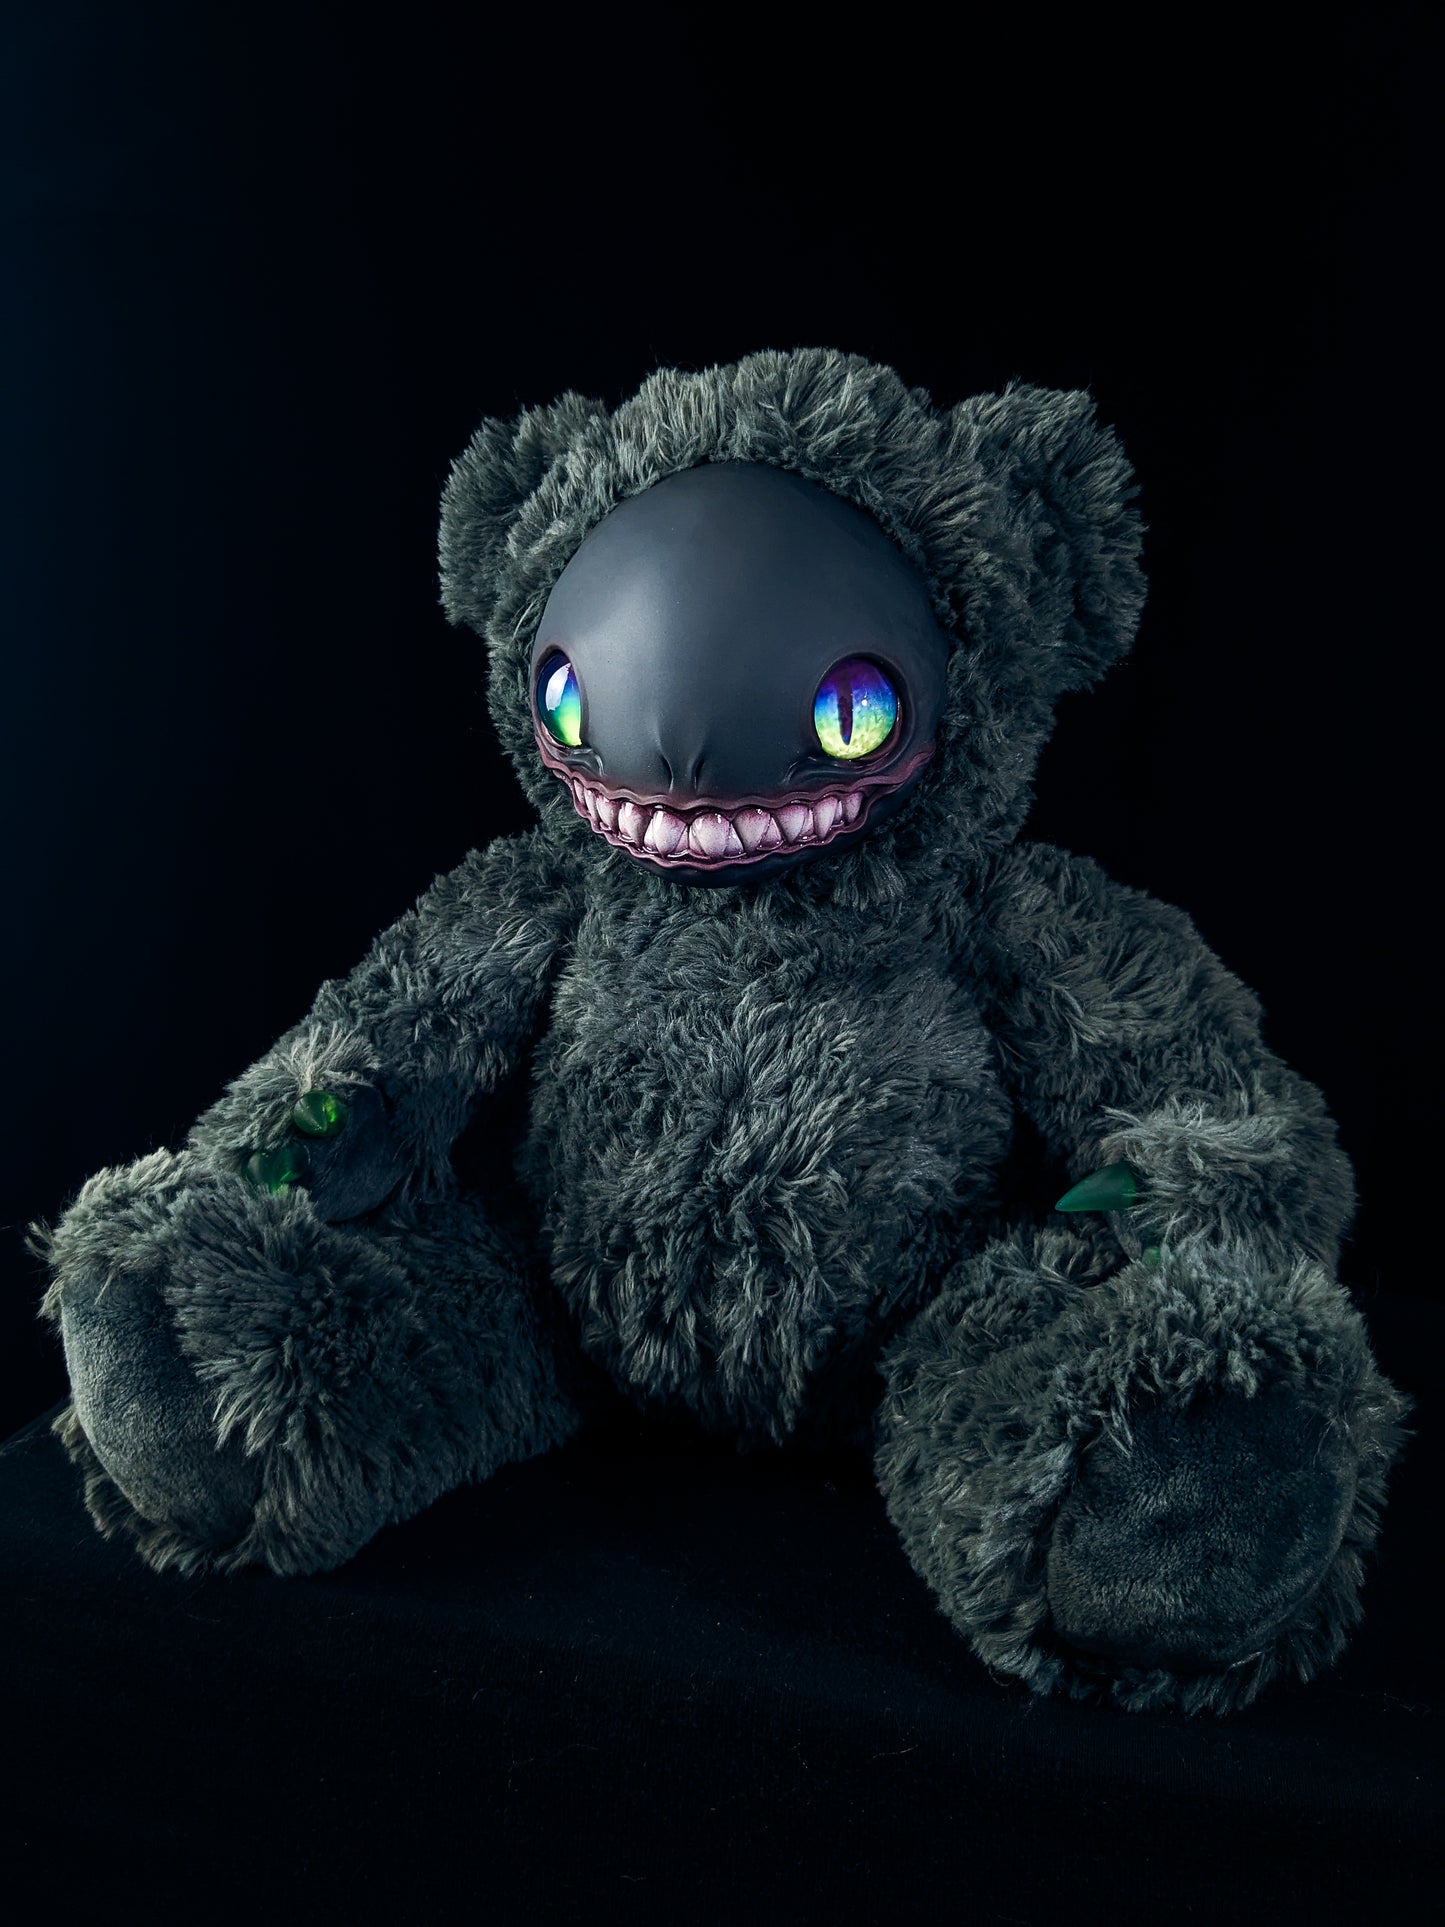 Krazy Klaw: FRIEND - CRYPTCRITZ Handcrafted Alien Art Doll Plush Toy for Cosmic Dreamers